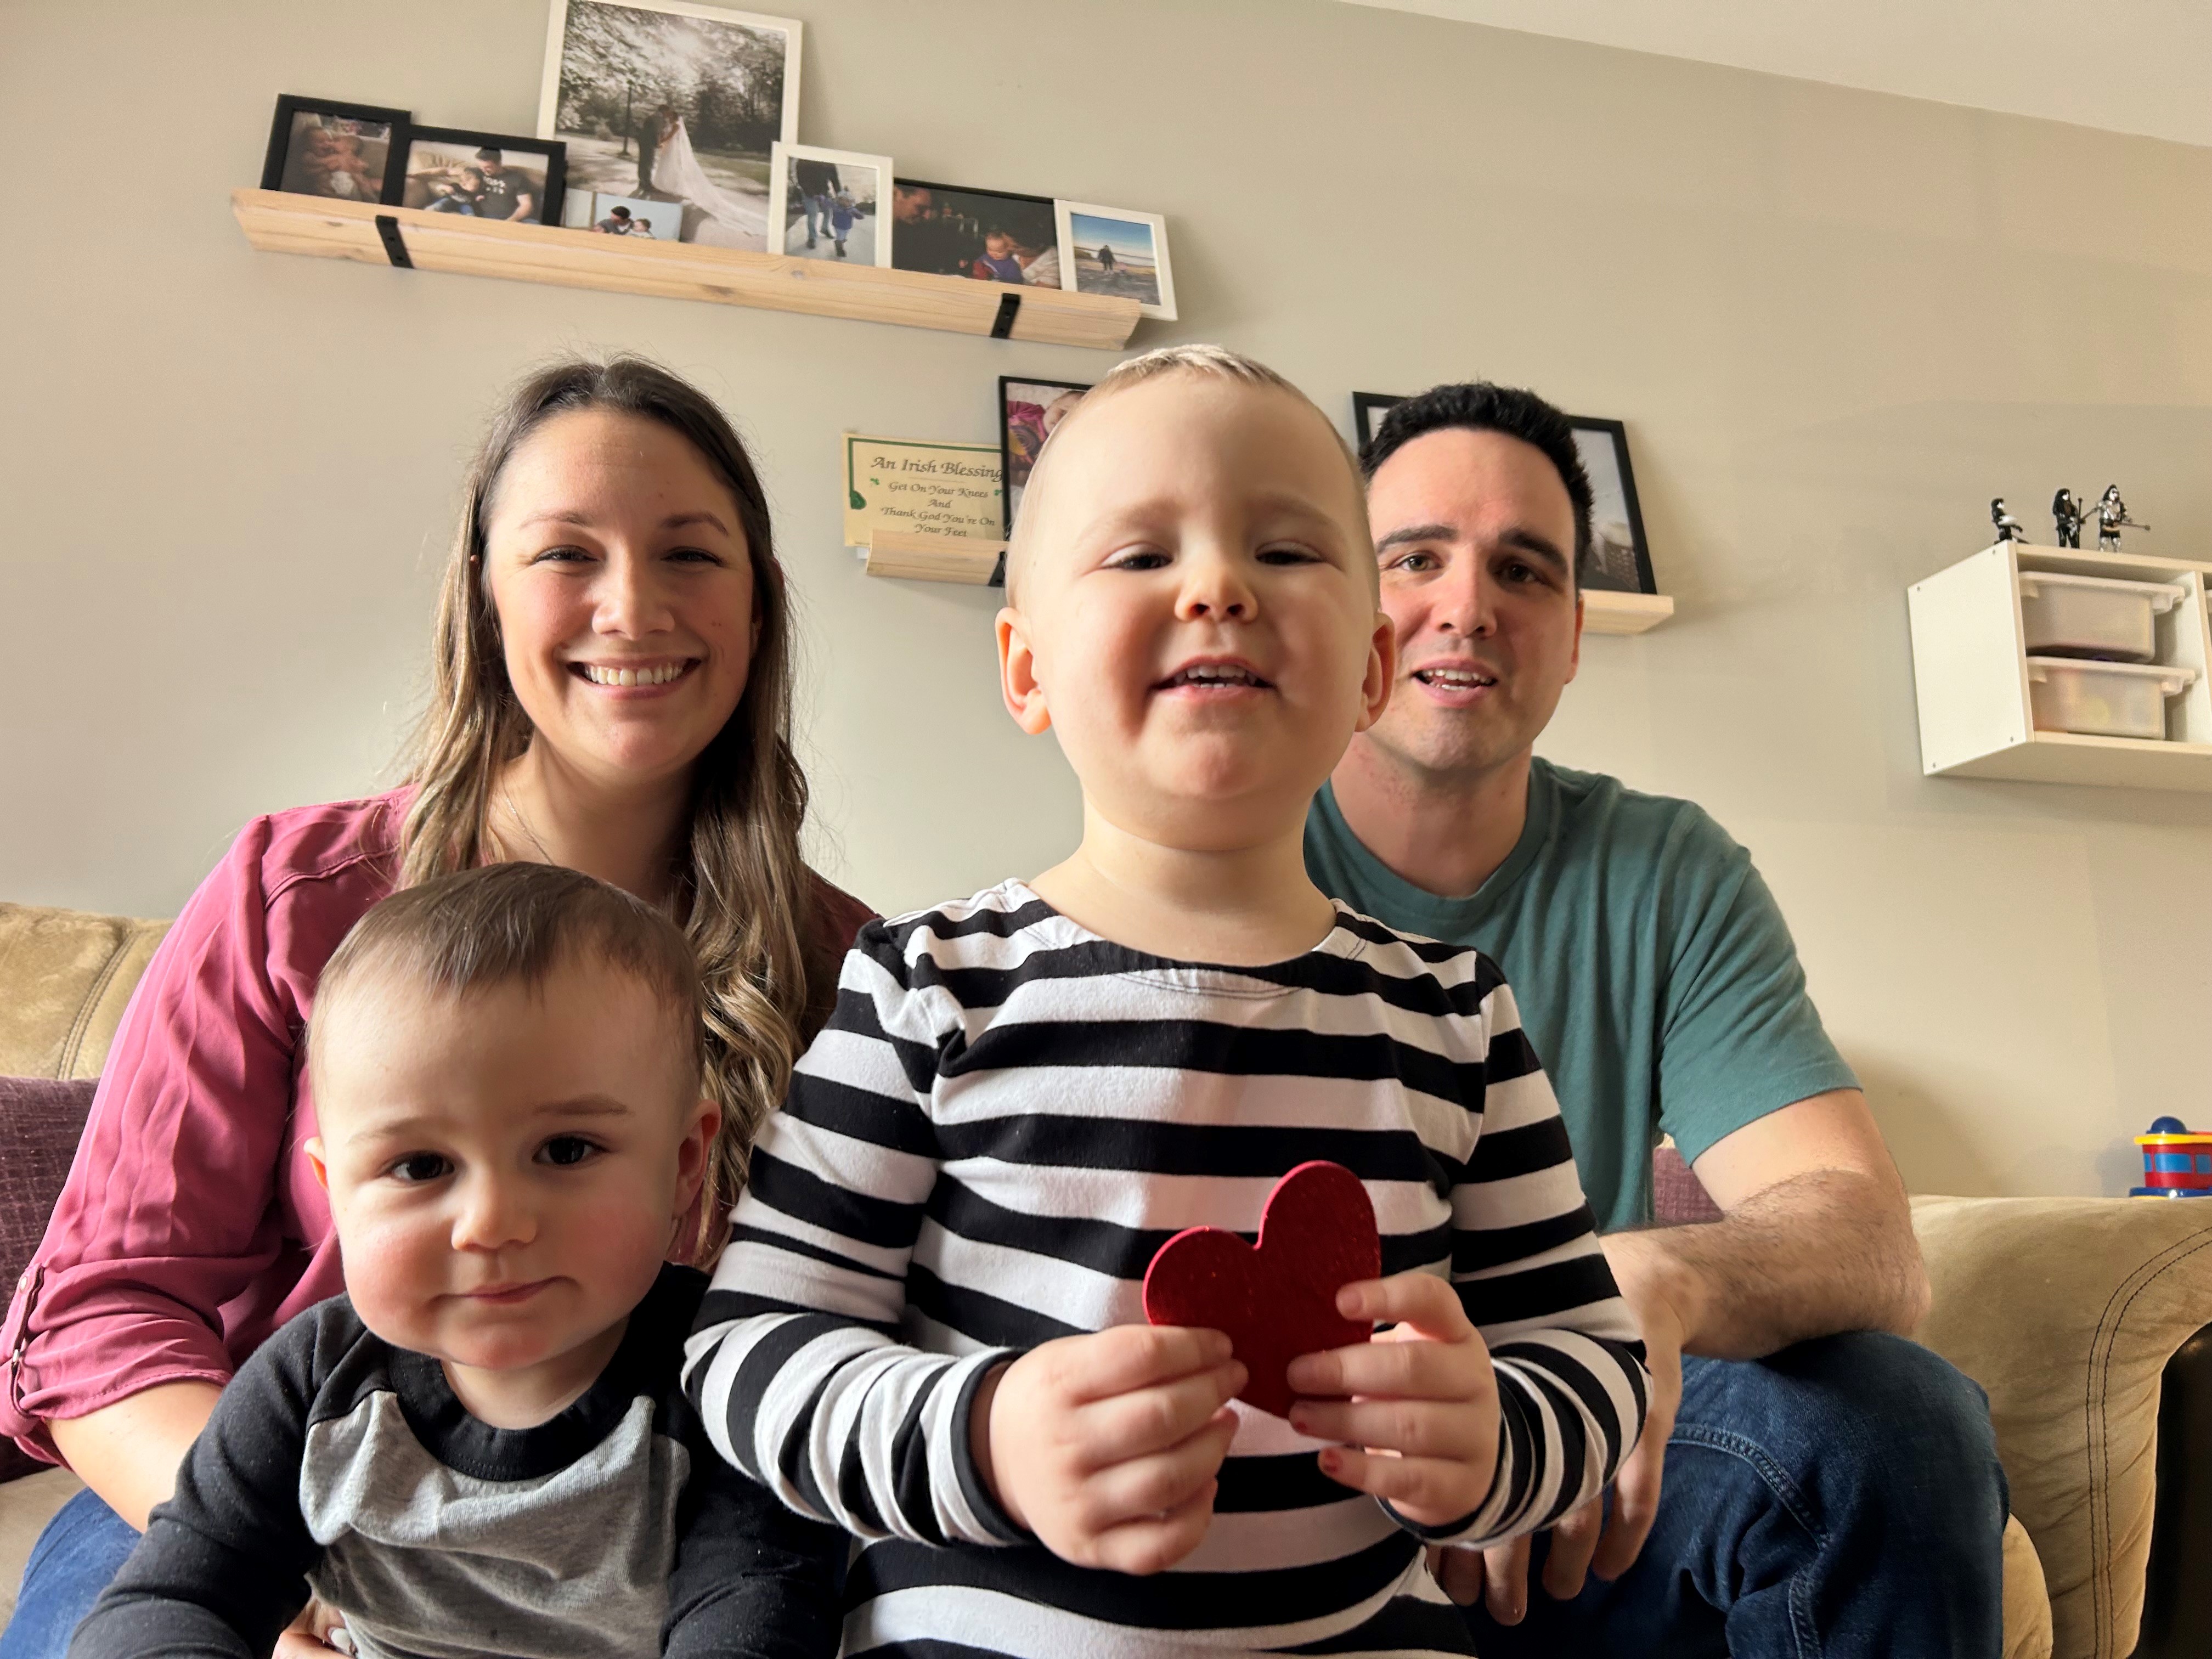 Montreal-area parents to host blood drive in honour of 2-year-old daughter in remission